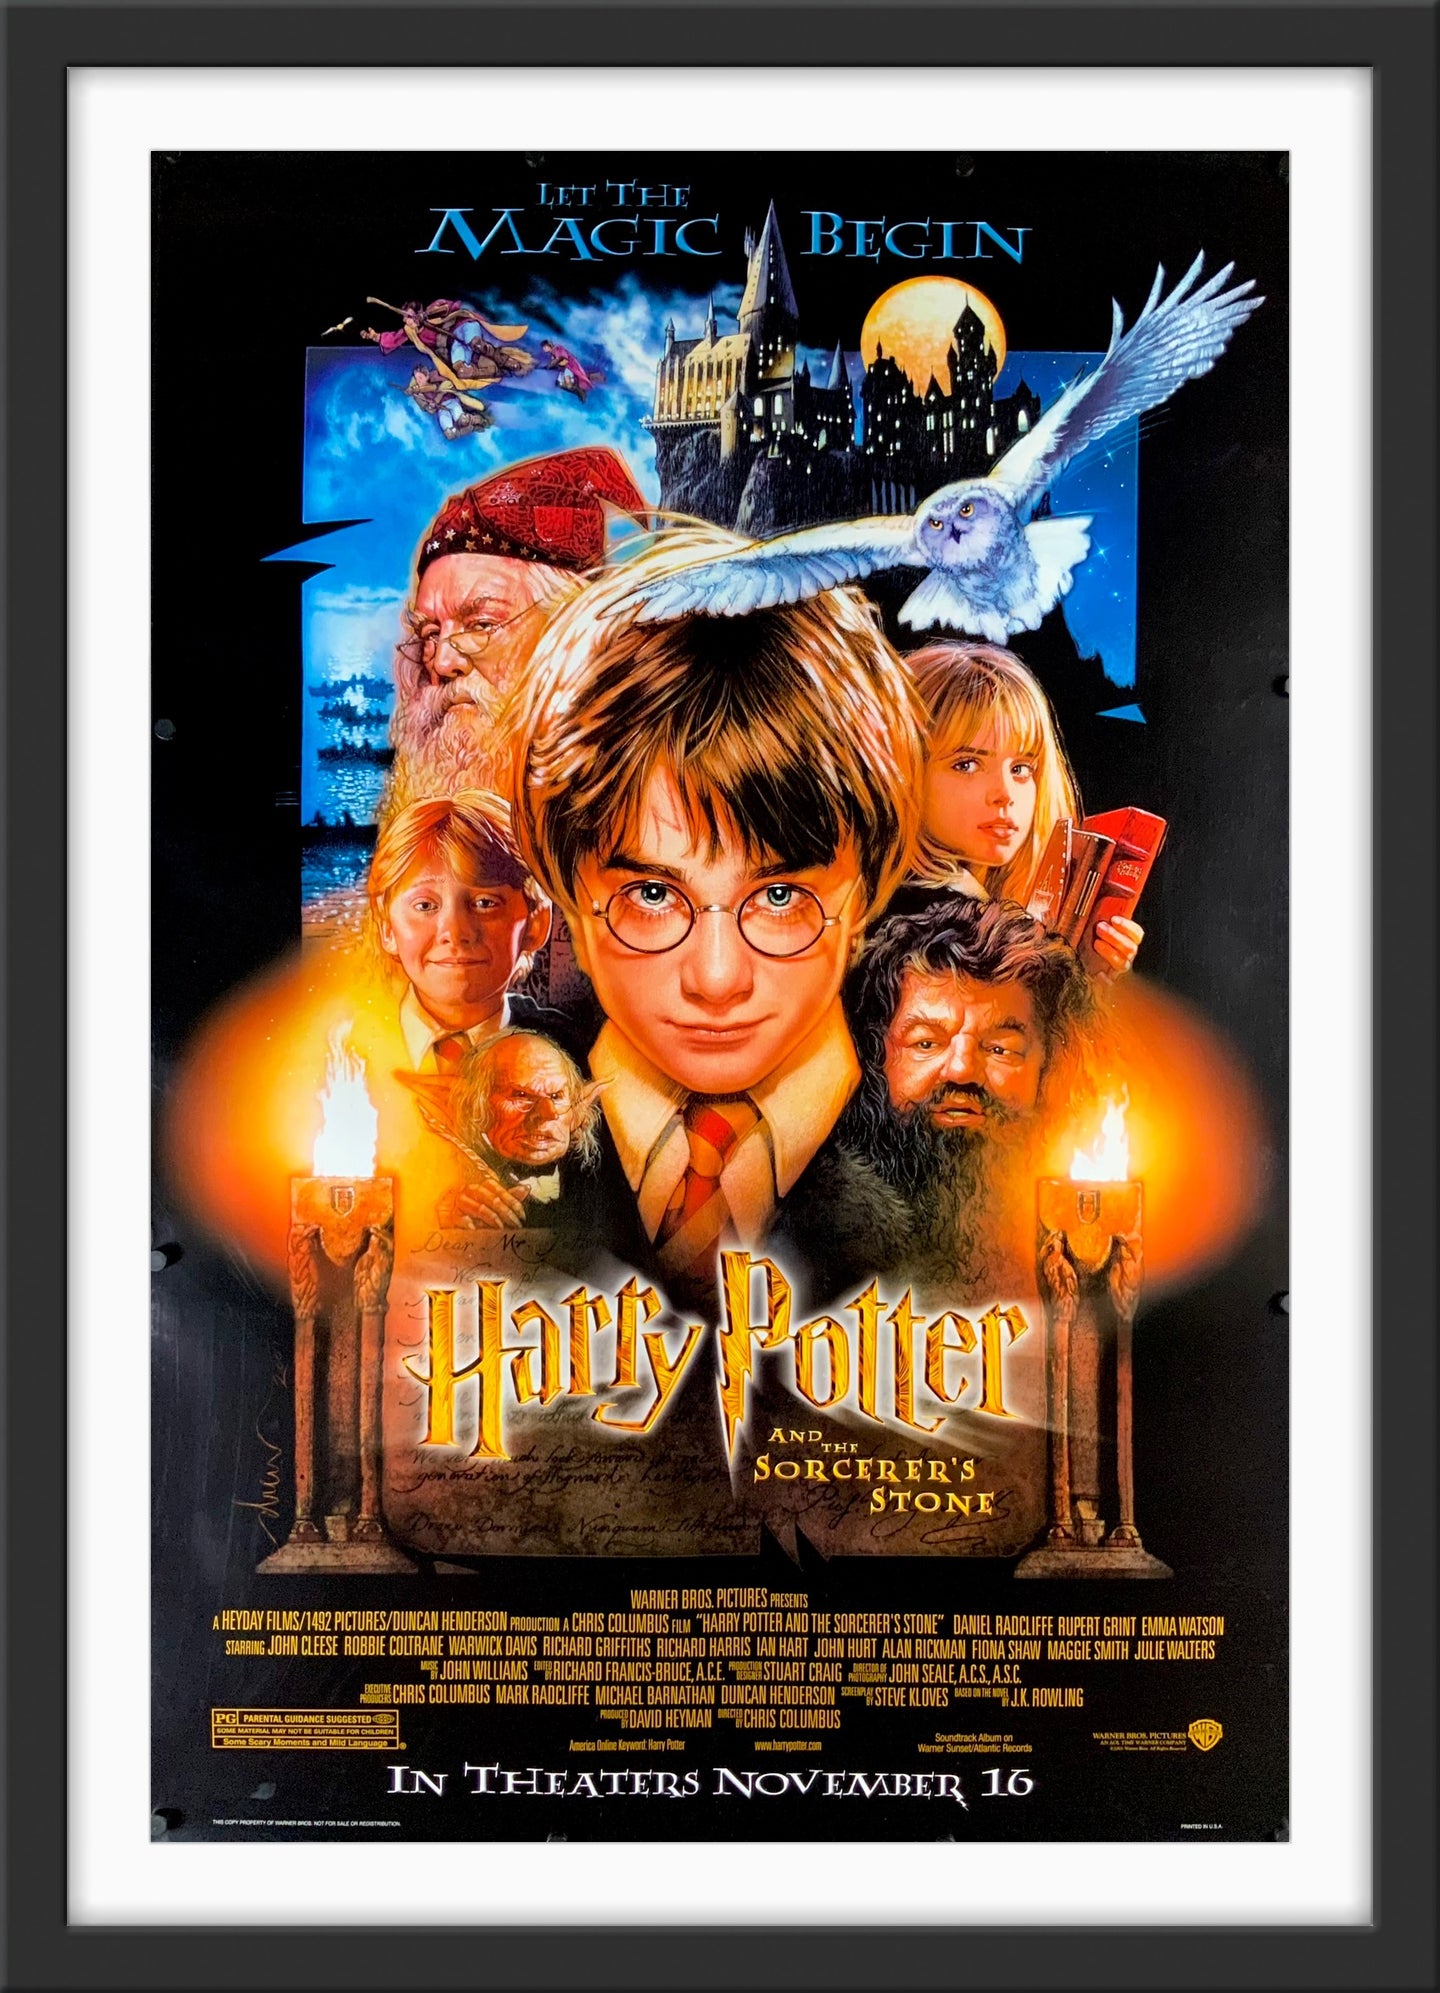 An original movie poster for the film Harry Potter and the Philosopher's Stone